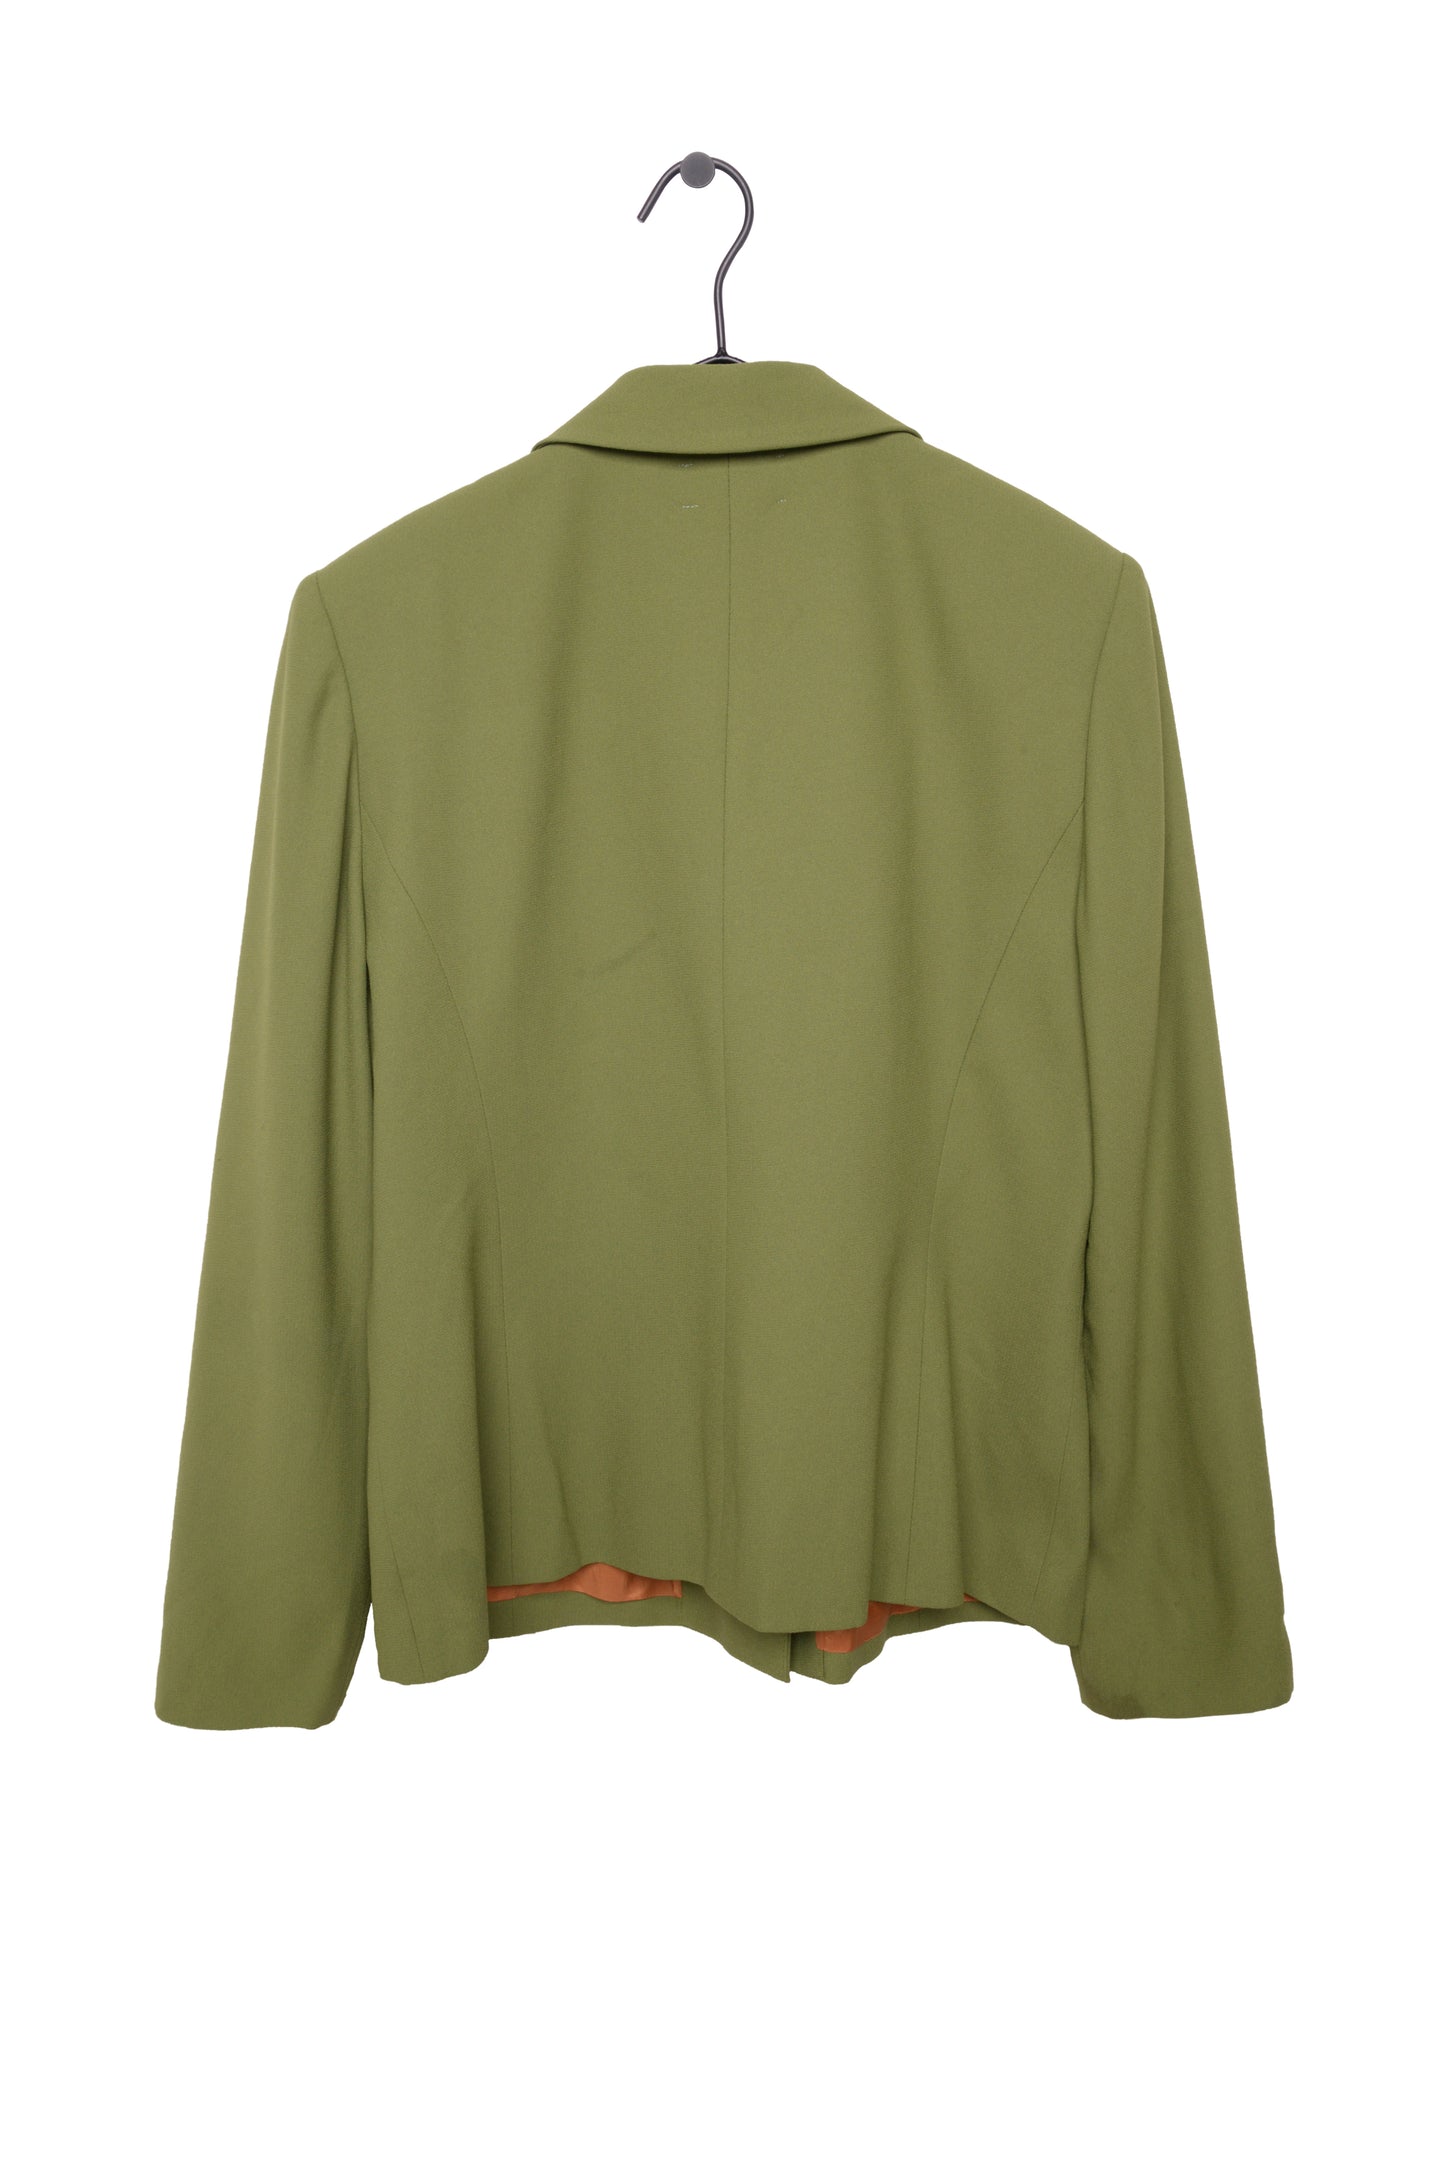 Double Breasted Olive Blazer